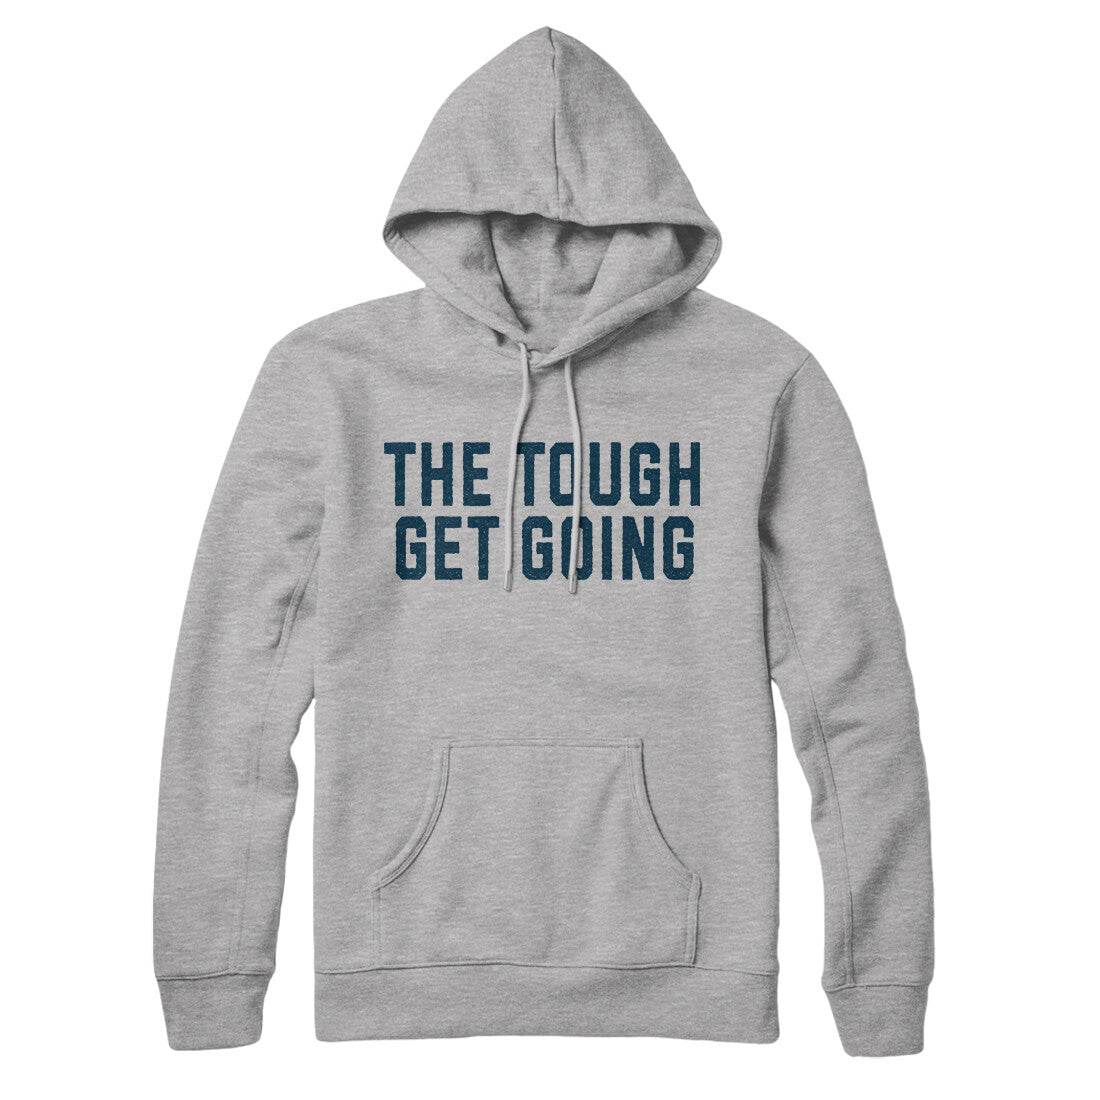 The Tough Get Going in Heather Grey Color